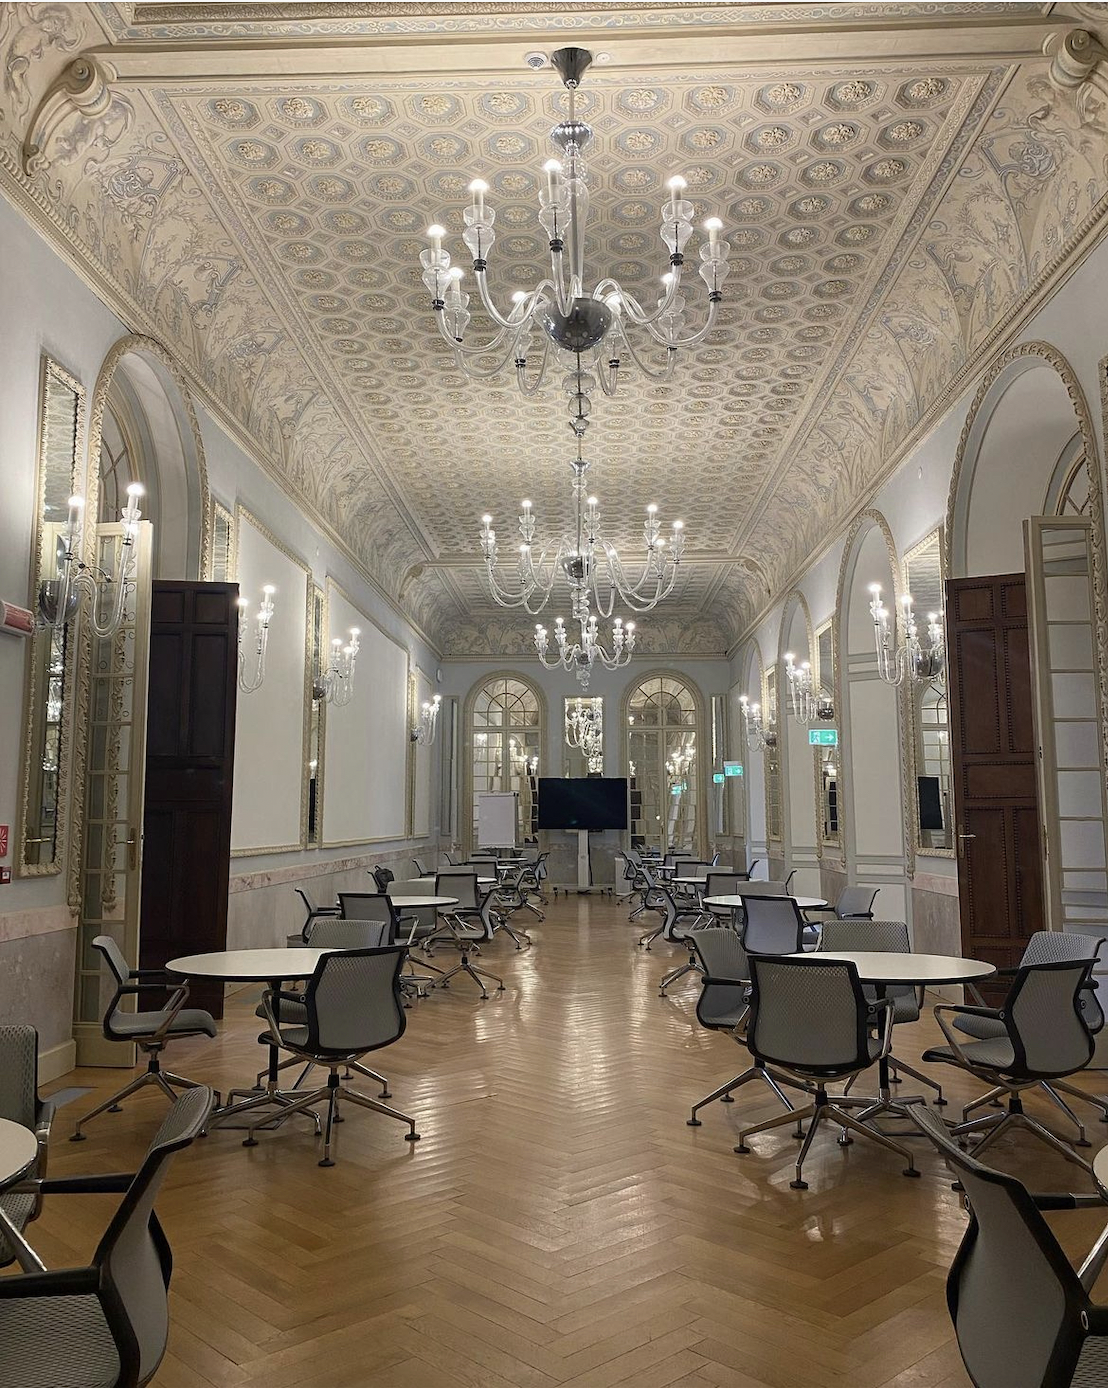 One of the many beautiful classrooms at LUISS university